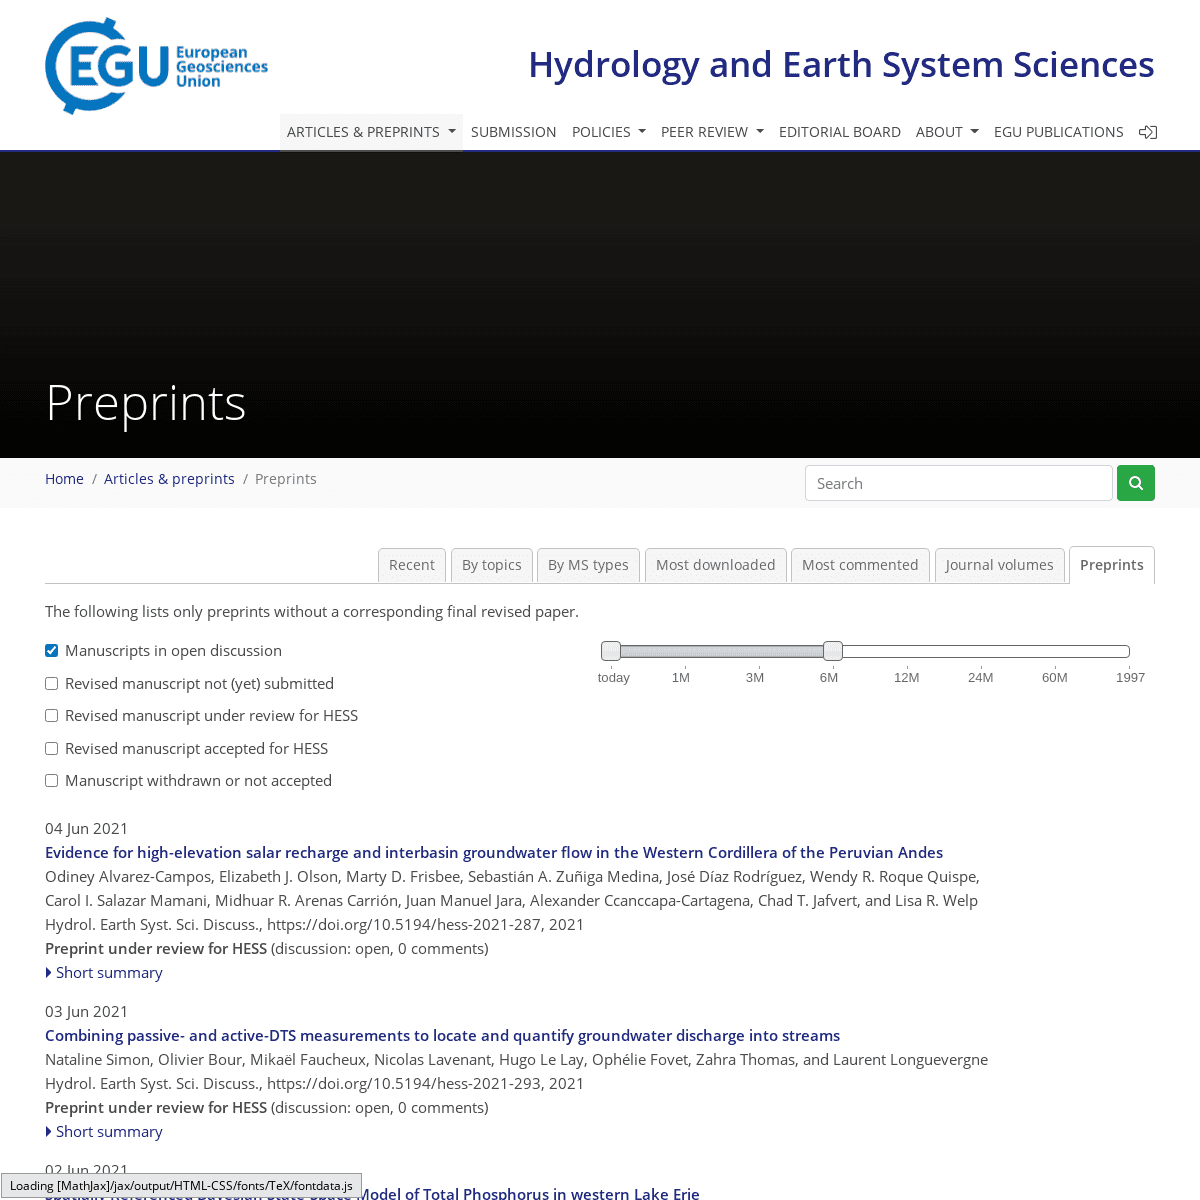 A complete backup of https://hydrol-earth-syst-sci-discuss.net